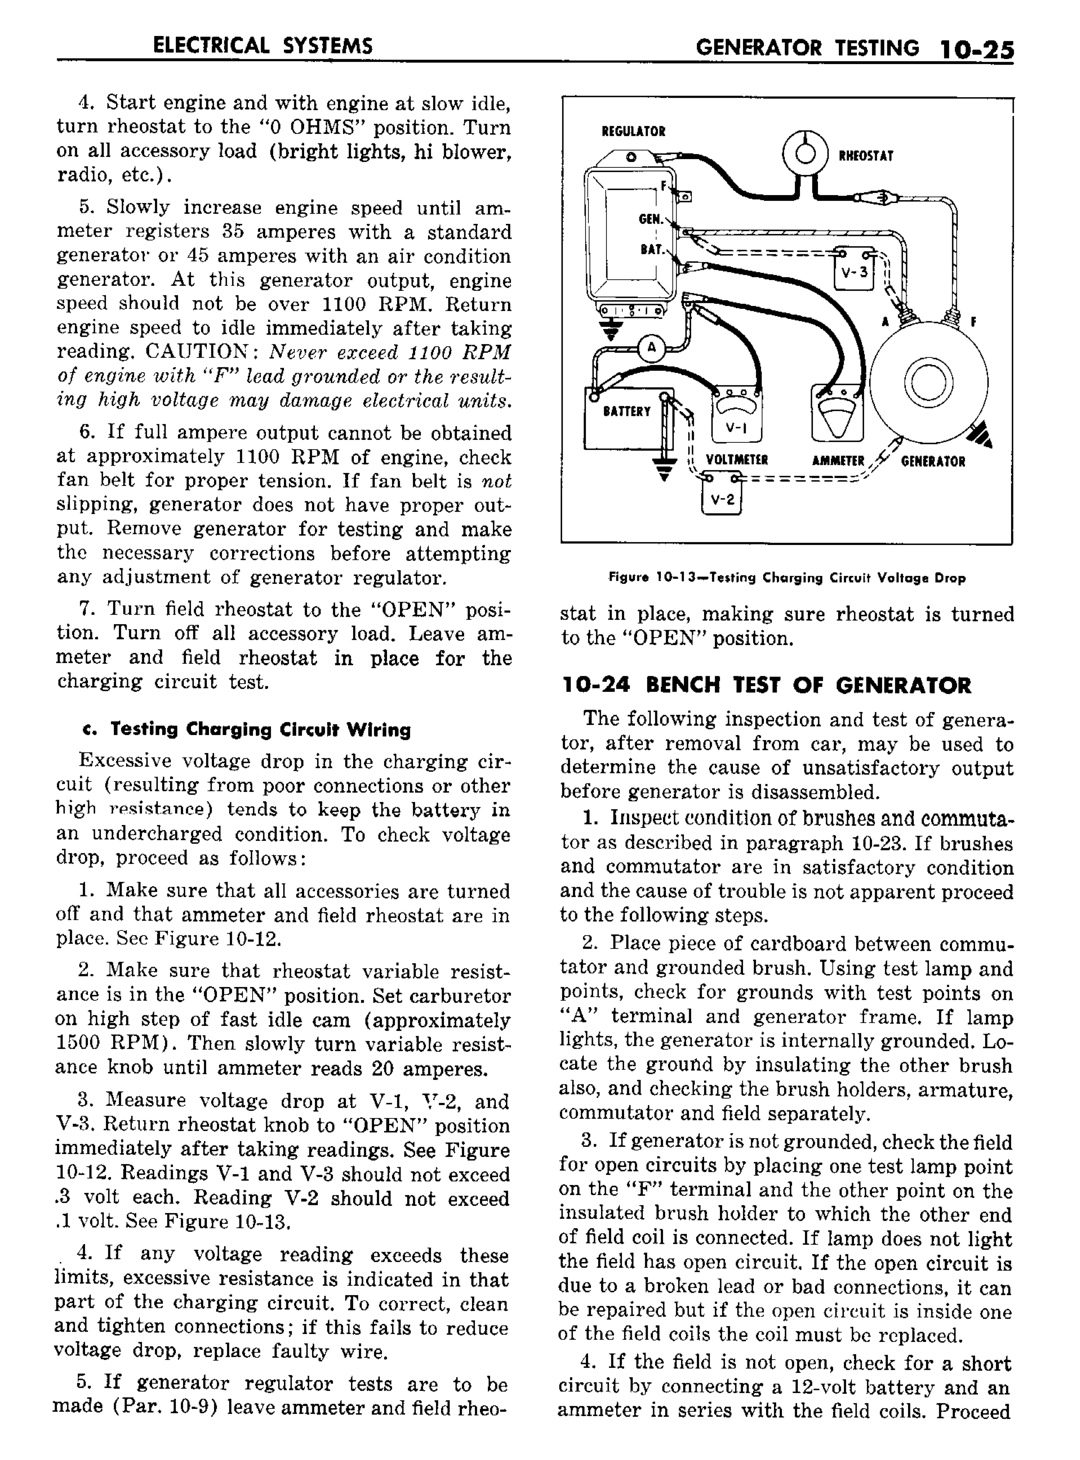 n_11 1960 Buick Shop Manual - Electrical Systems-025-025.jpg